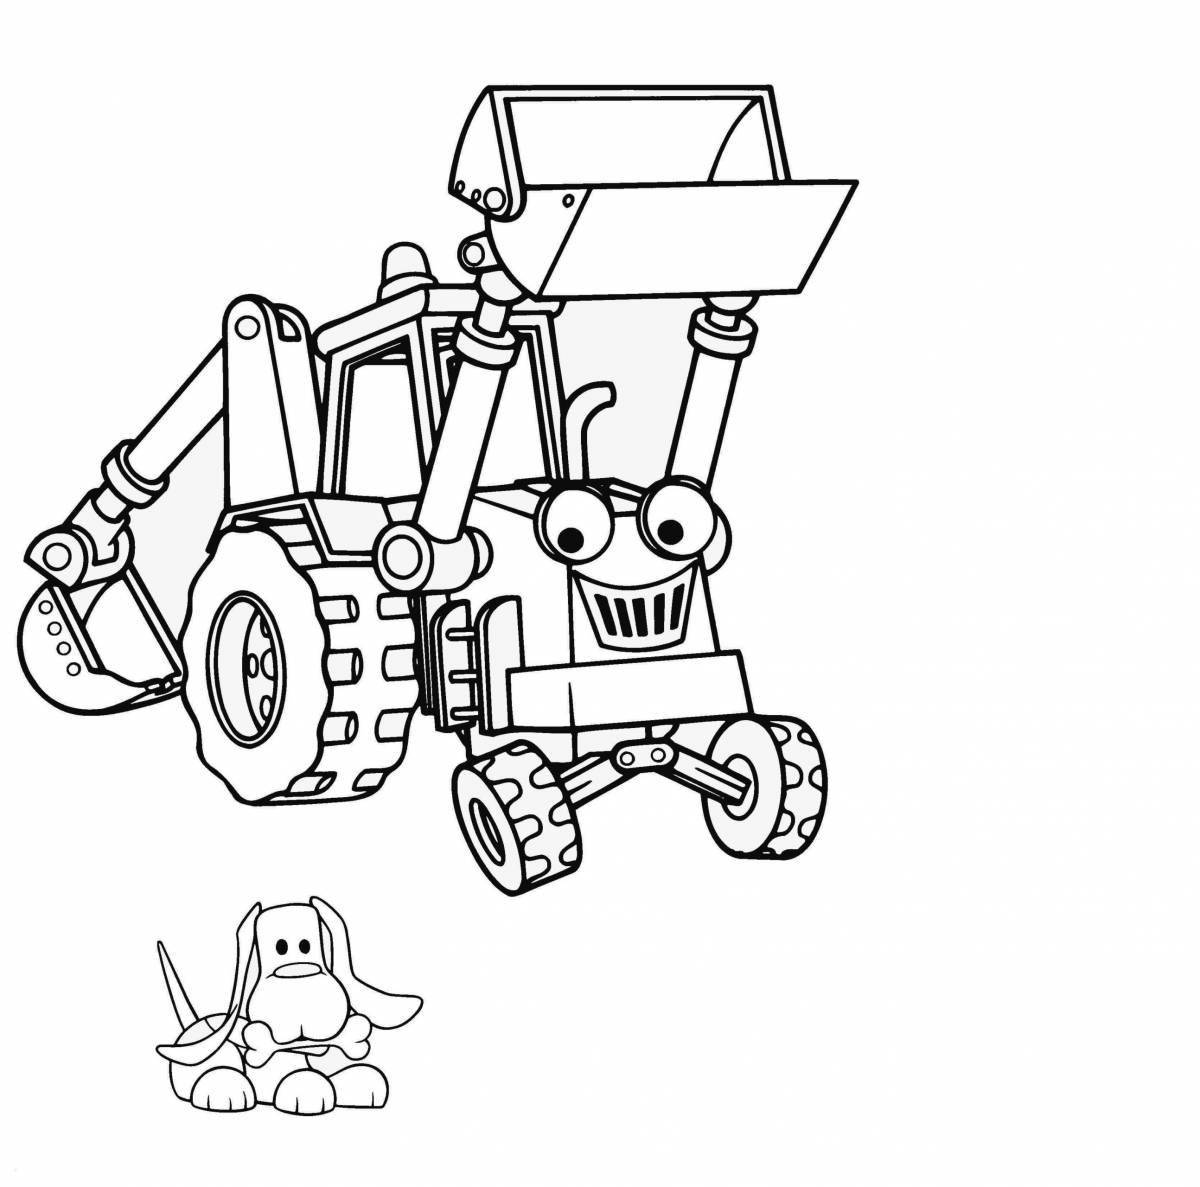 Adorable excavator coloring page for boys